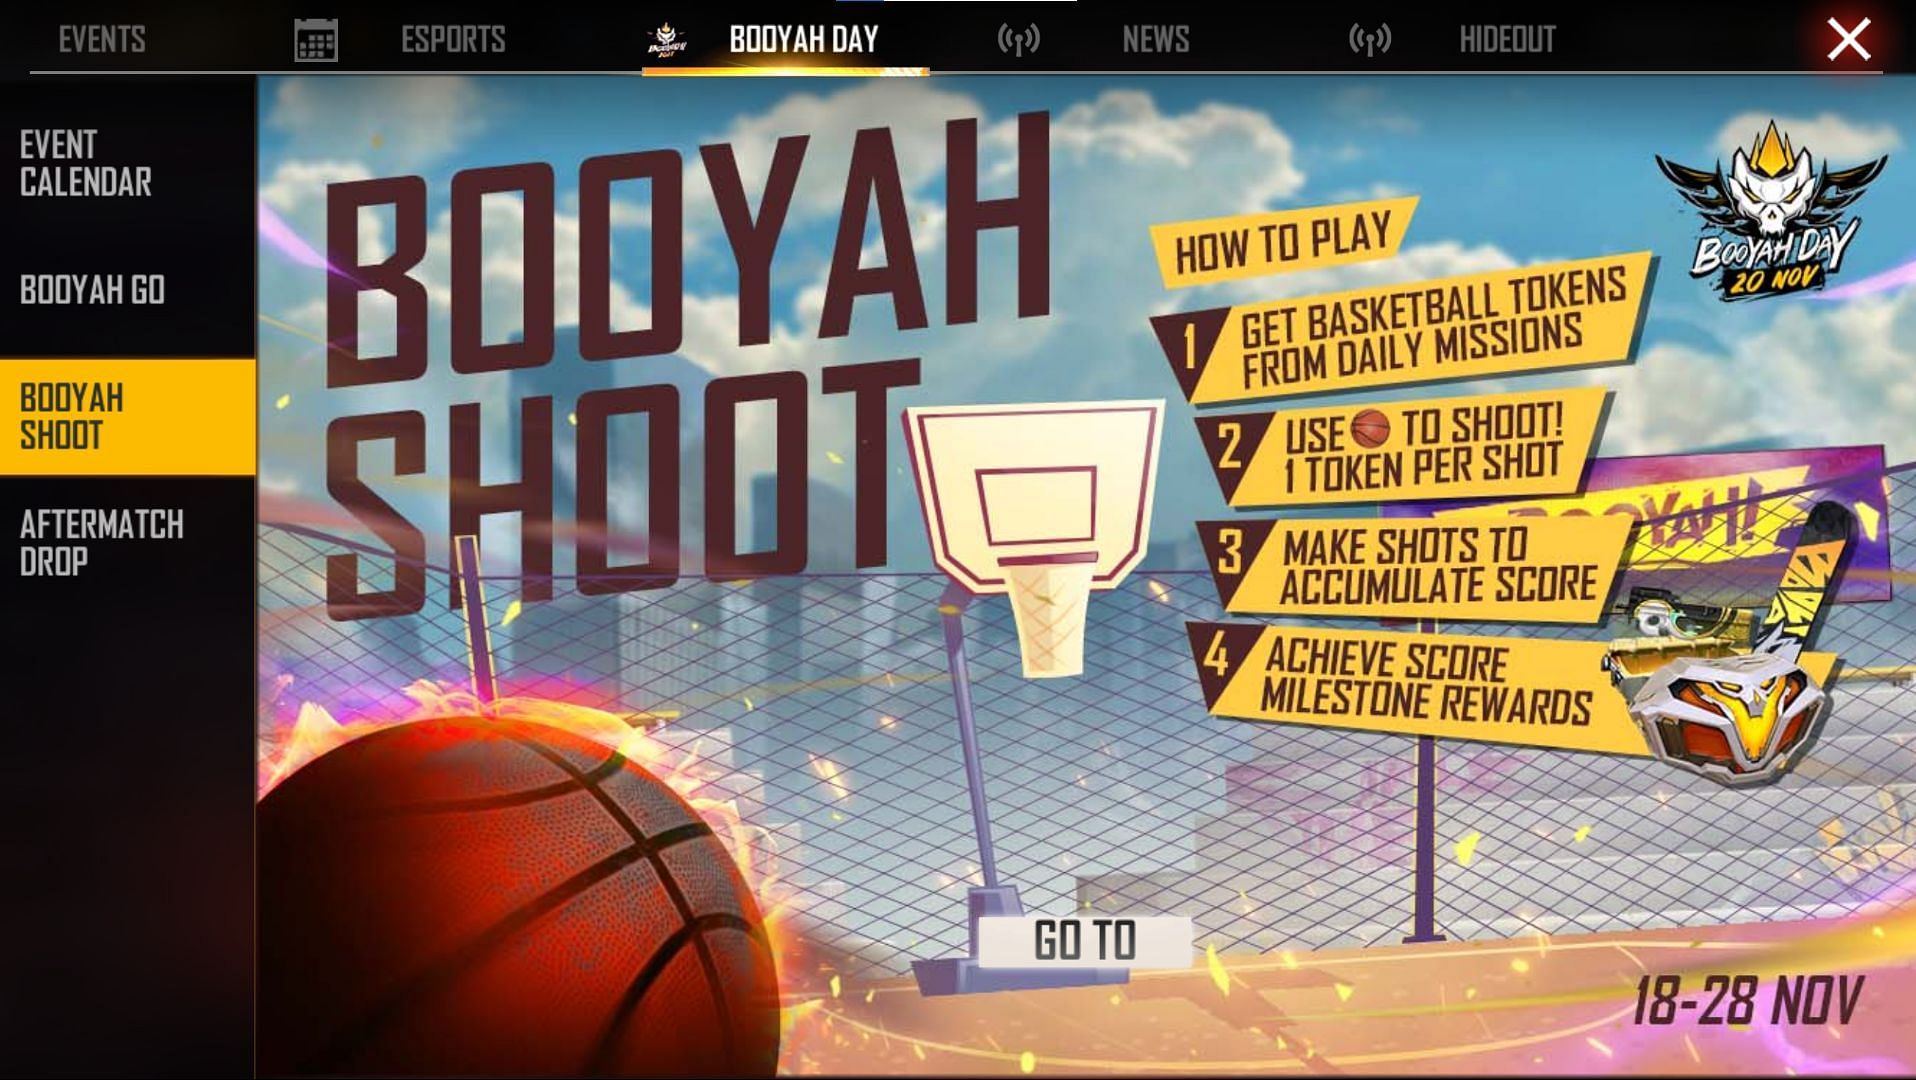 Booyah Shoot will be concluding today in Free Fire (Image via Free Fire)